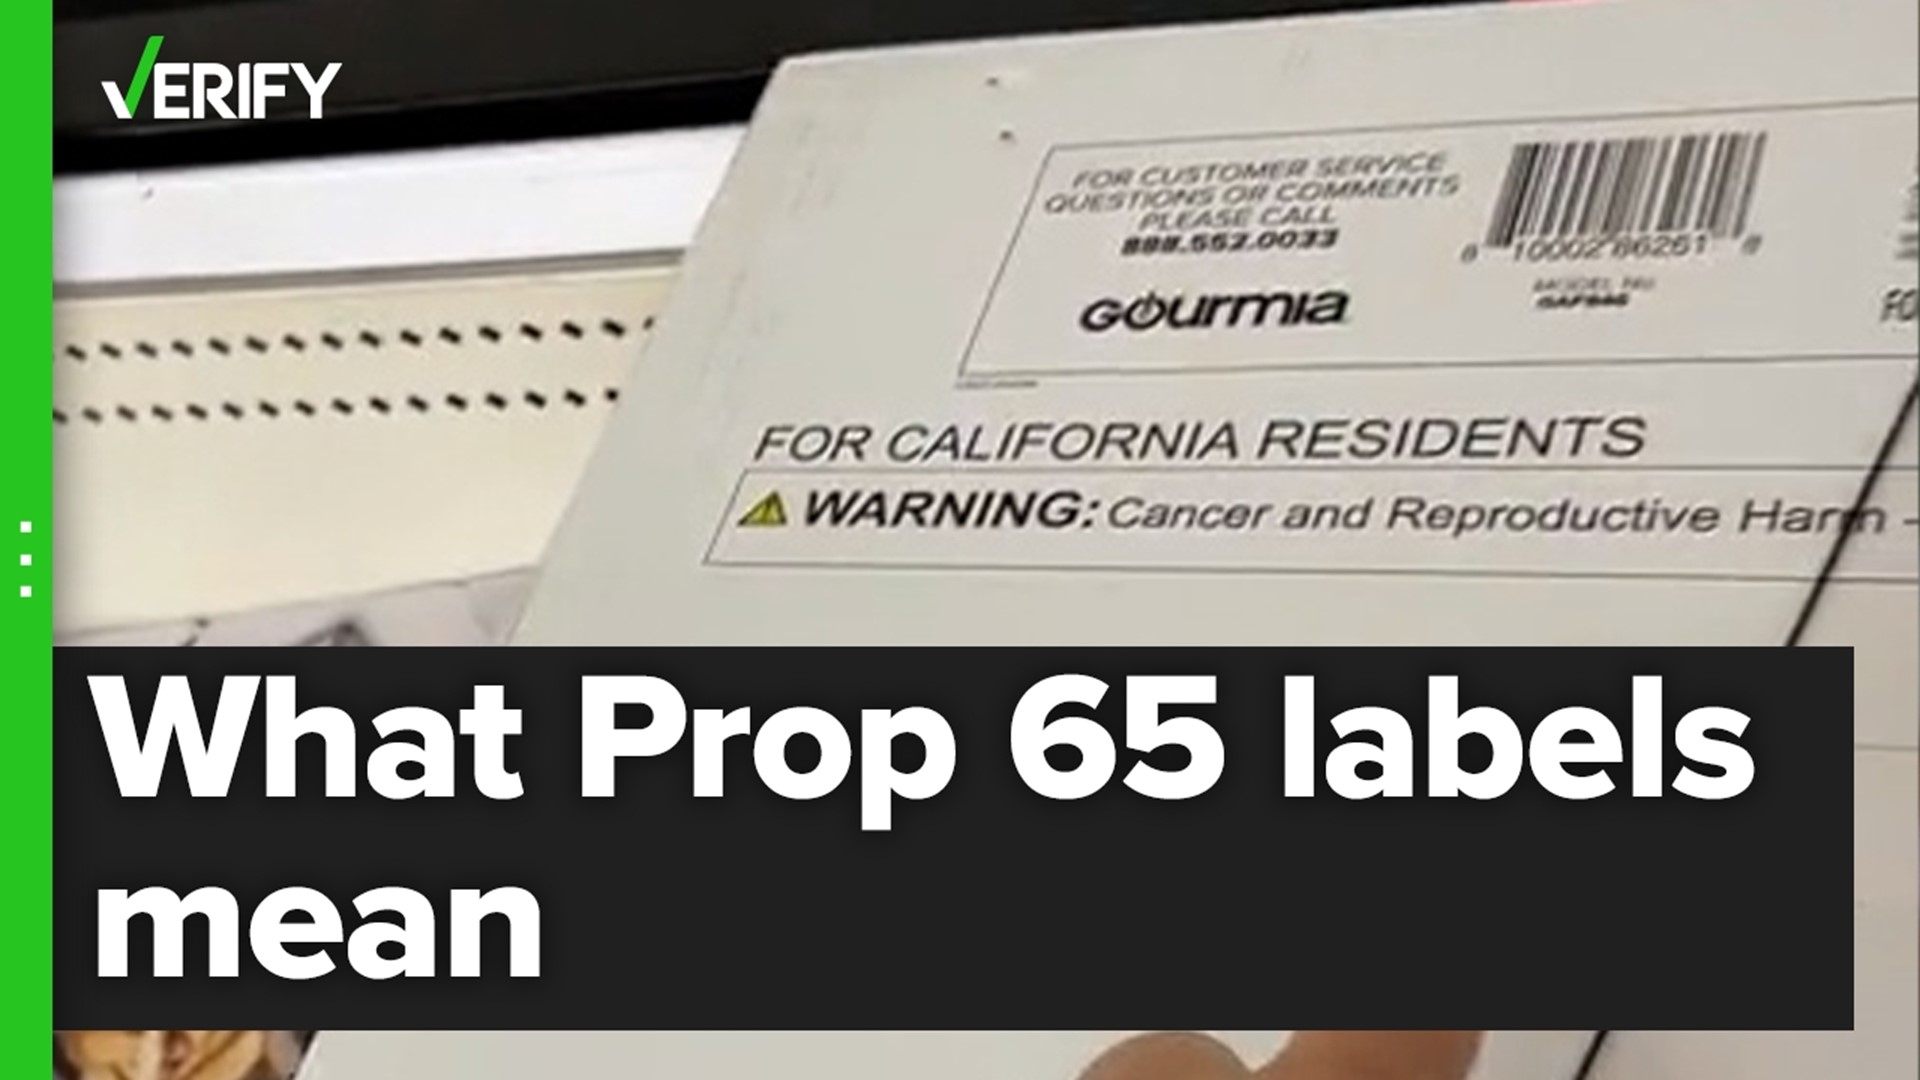 Prop 65 labels are meant to better inform consumers that a product or place may contain certain chemicals; they don’t mean one product is a significant cancer risk.